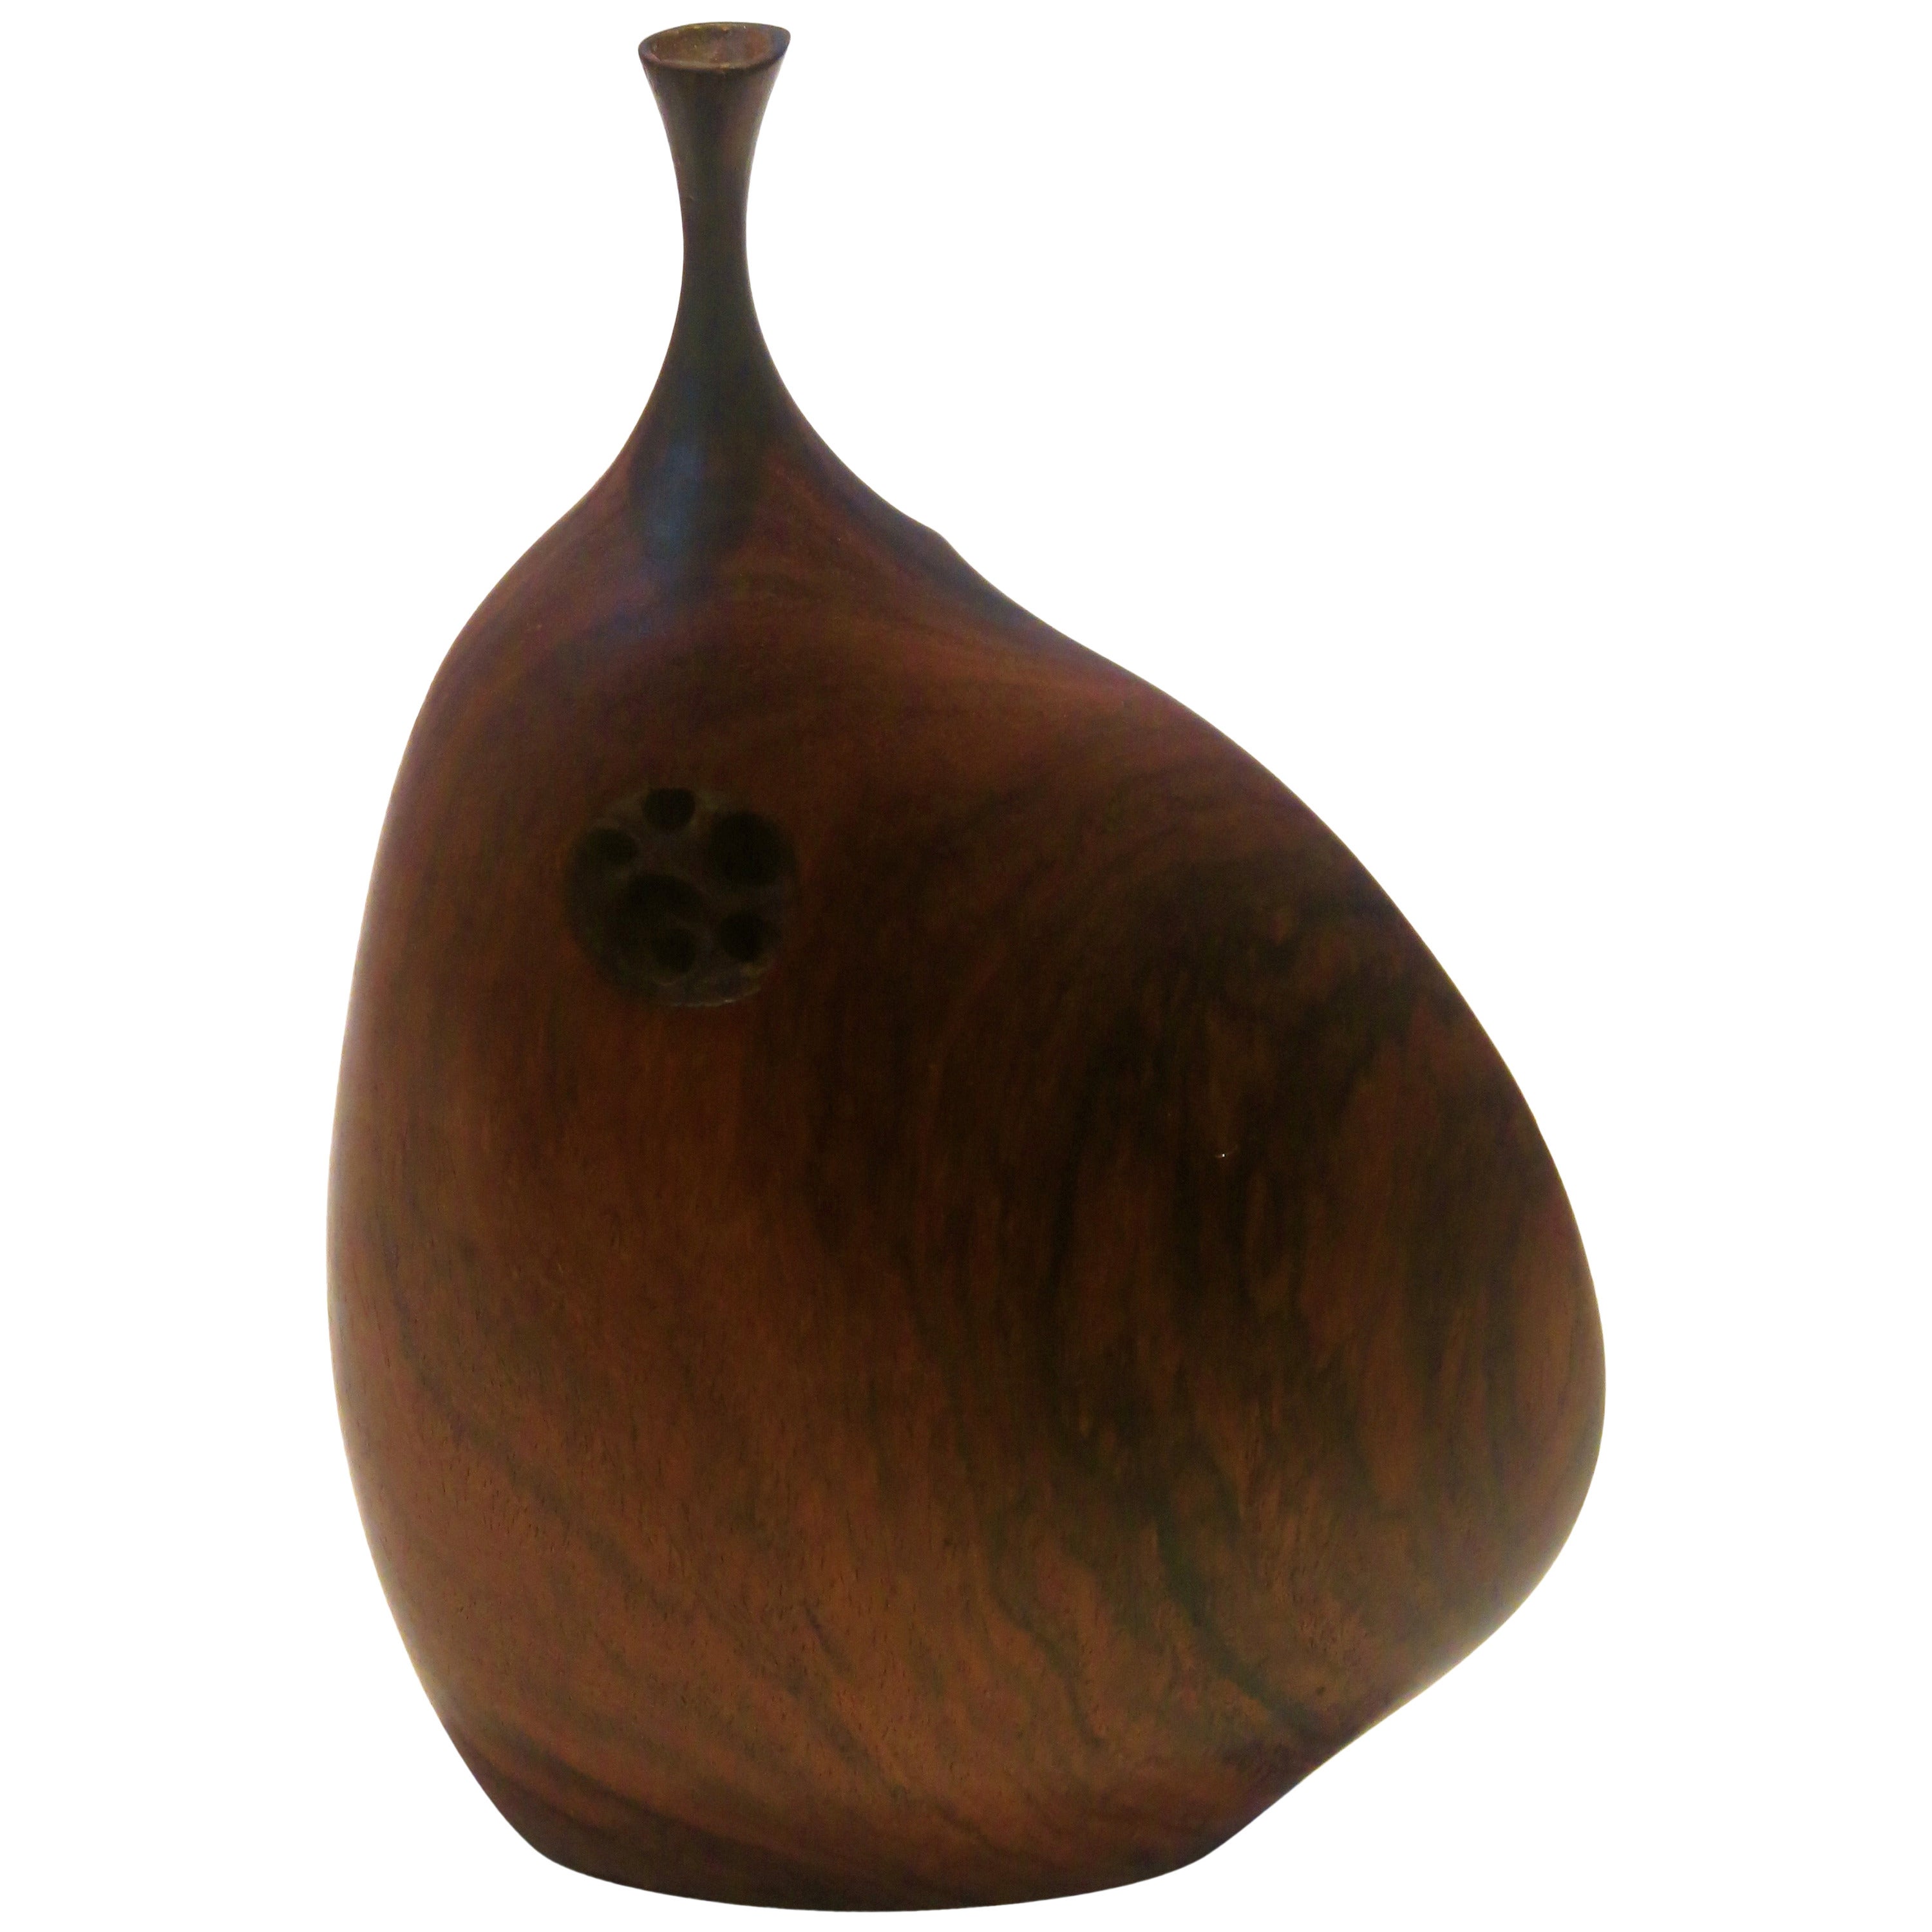 1960s California Design Mid-Century Modern Hand-Carved Wood Vase by Doug Ayers